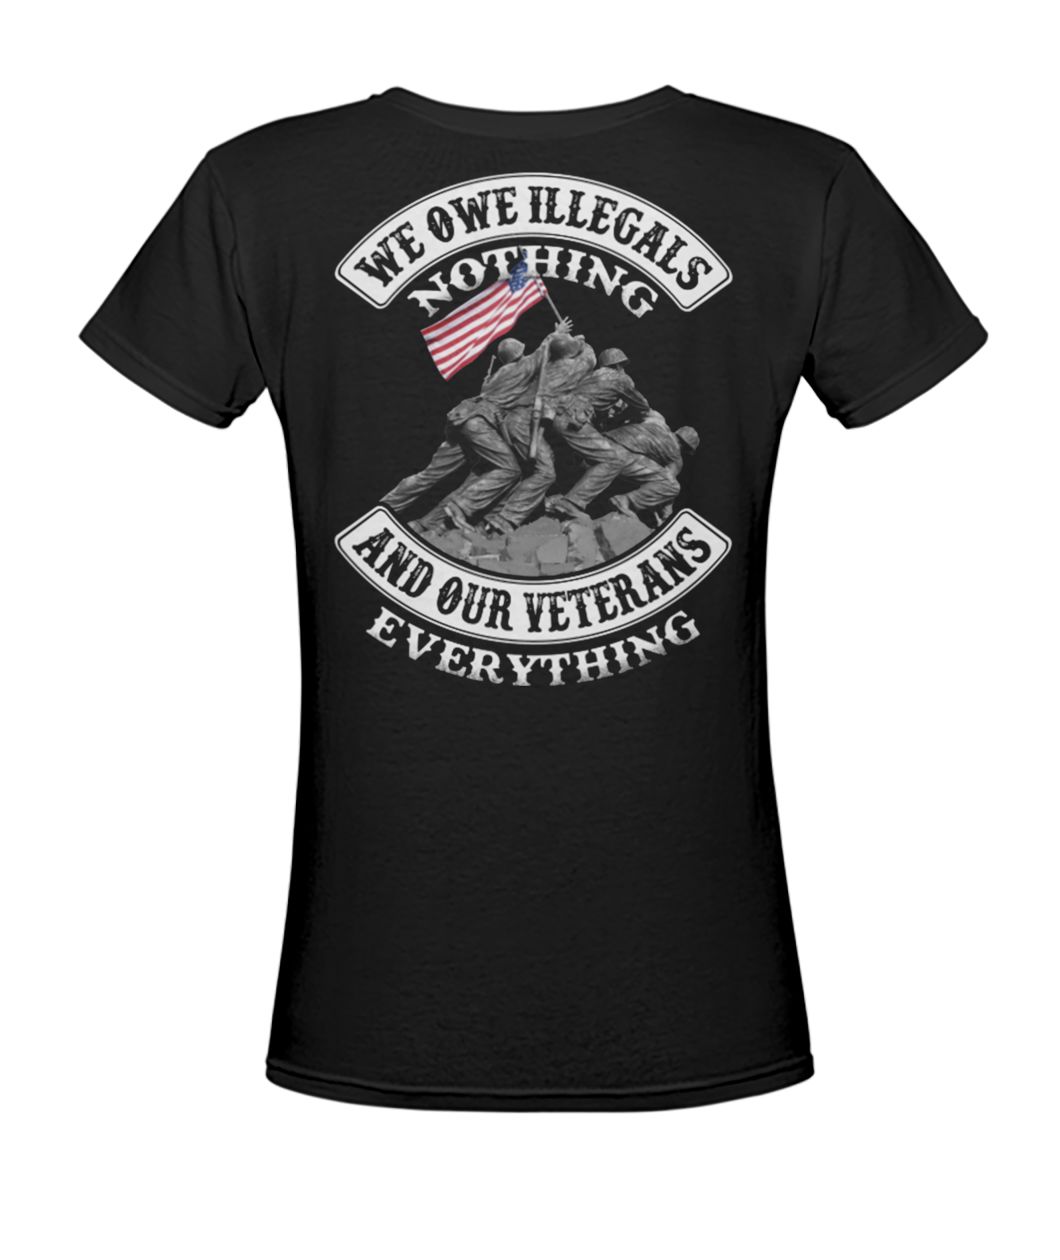 We owe illegals nothing we owe our veterans everything women's v-neck